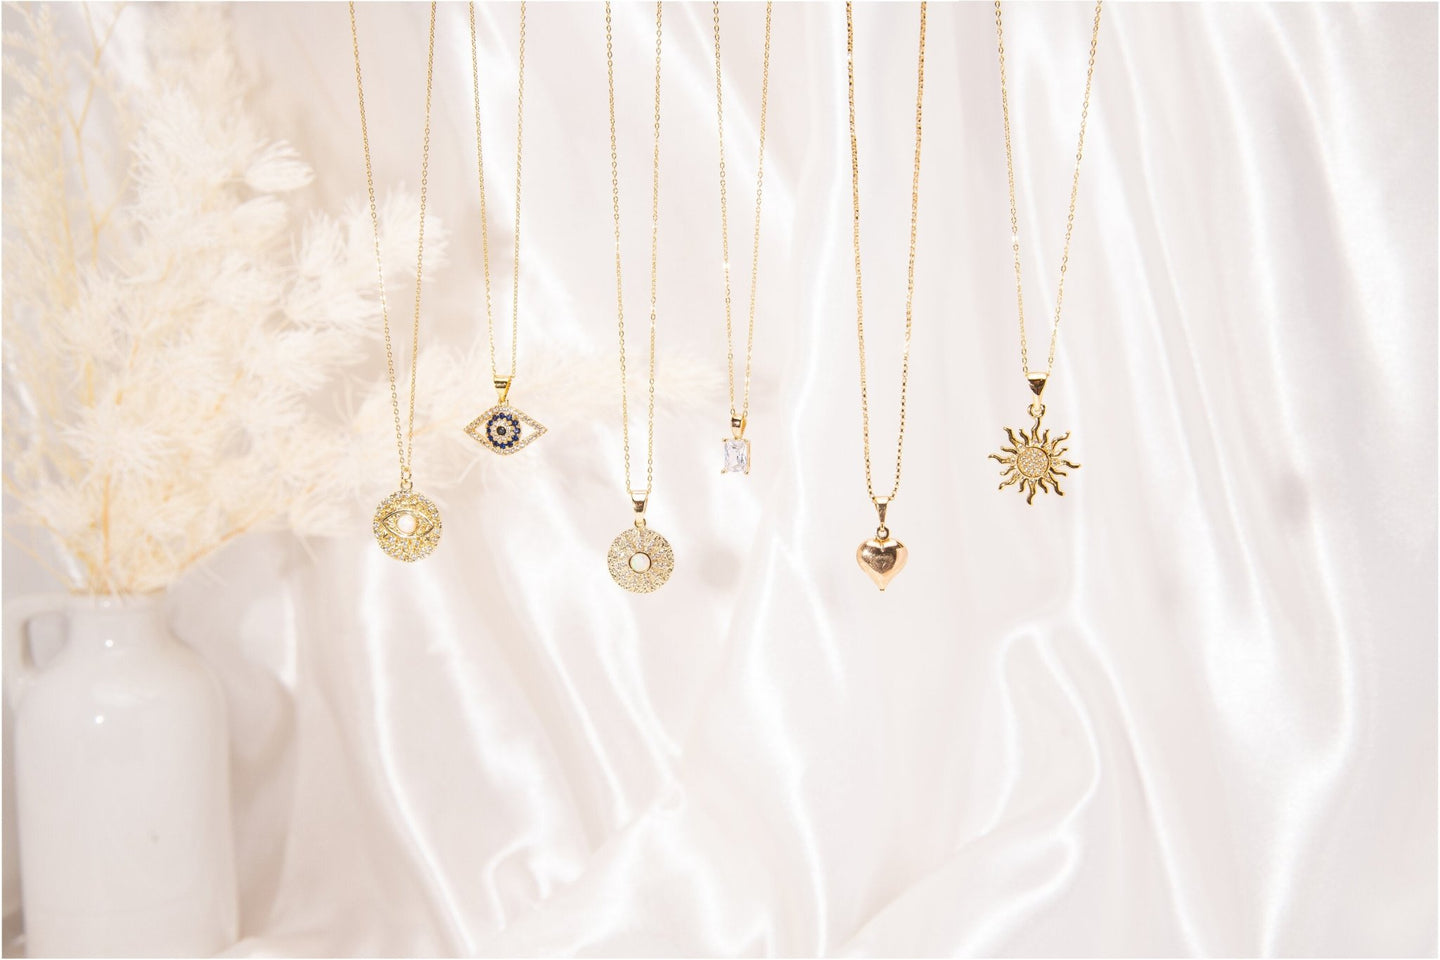 NECKLACES | The Essential Jewels